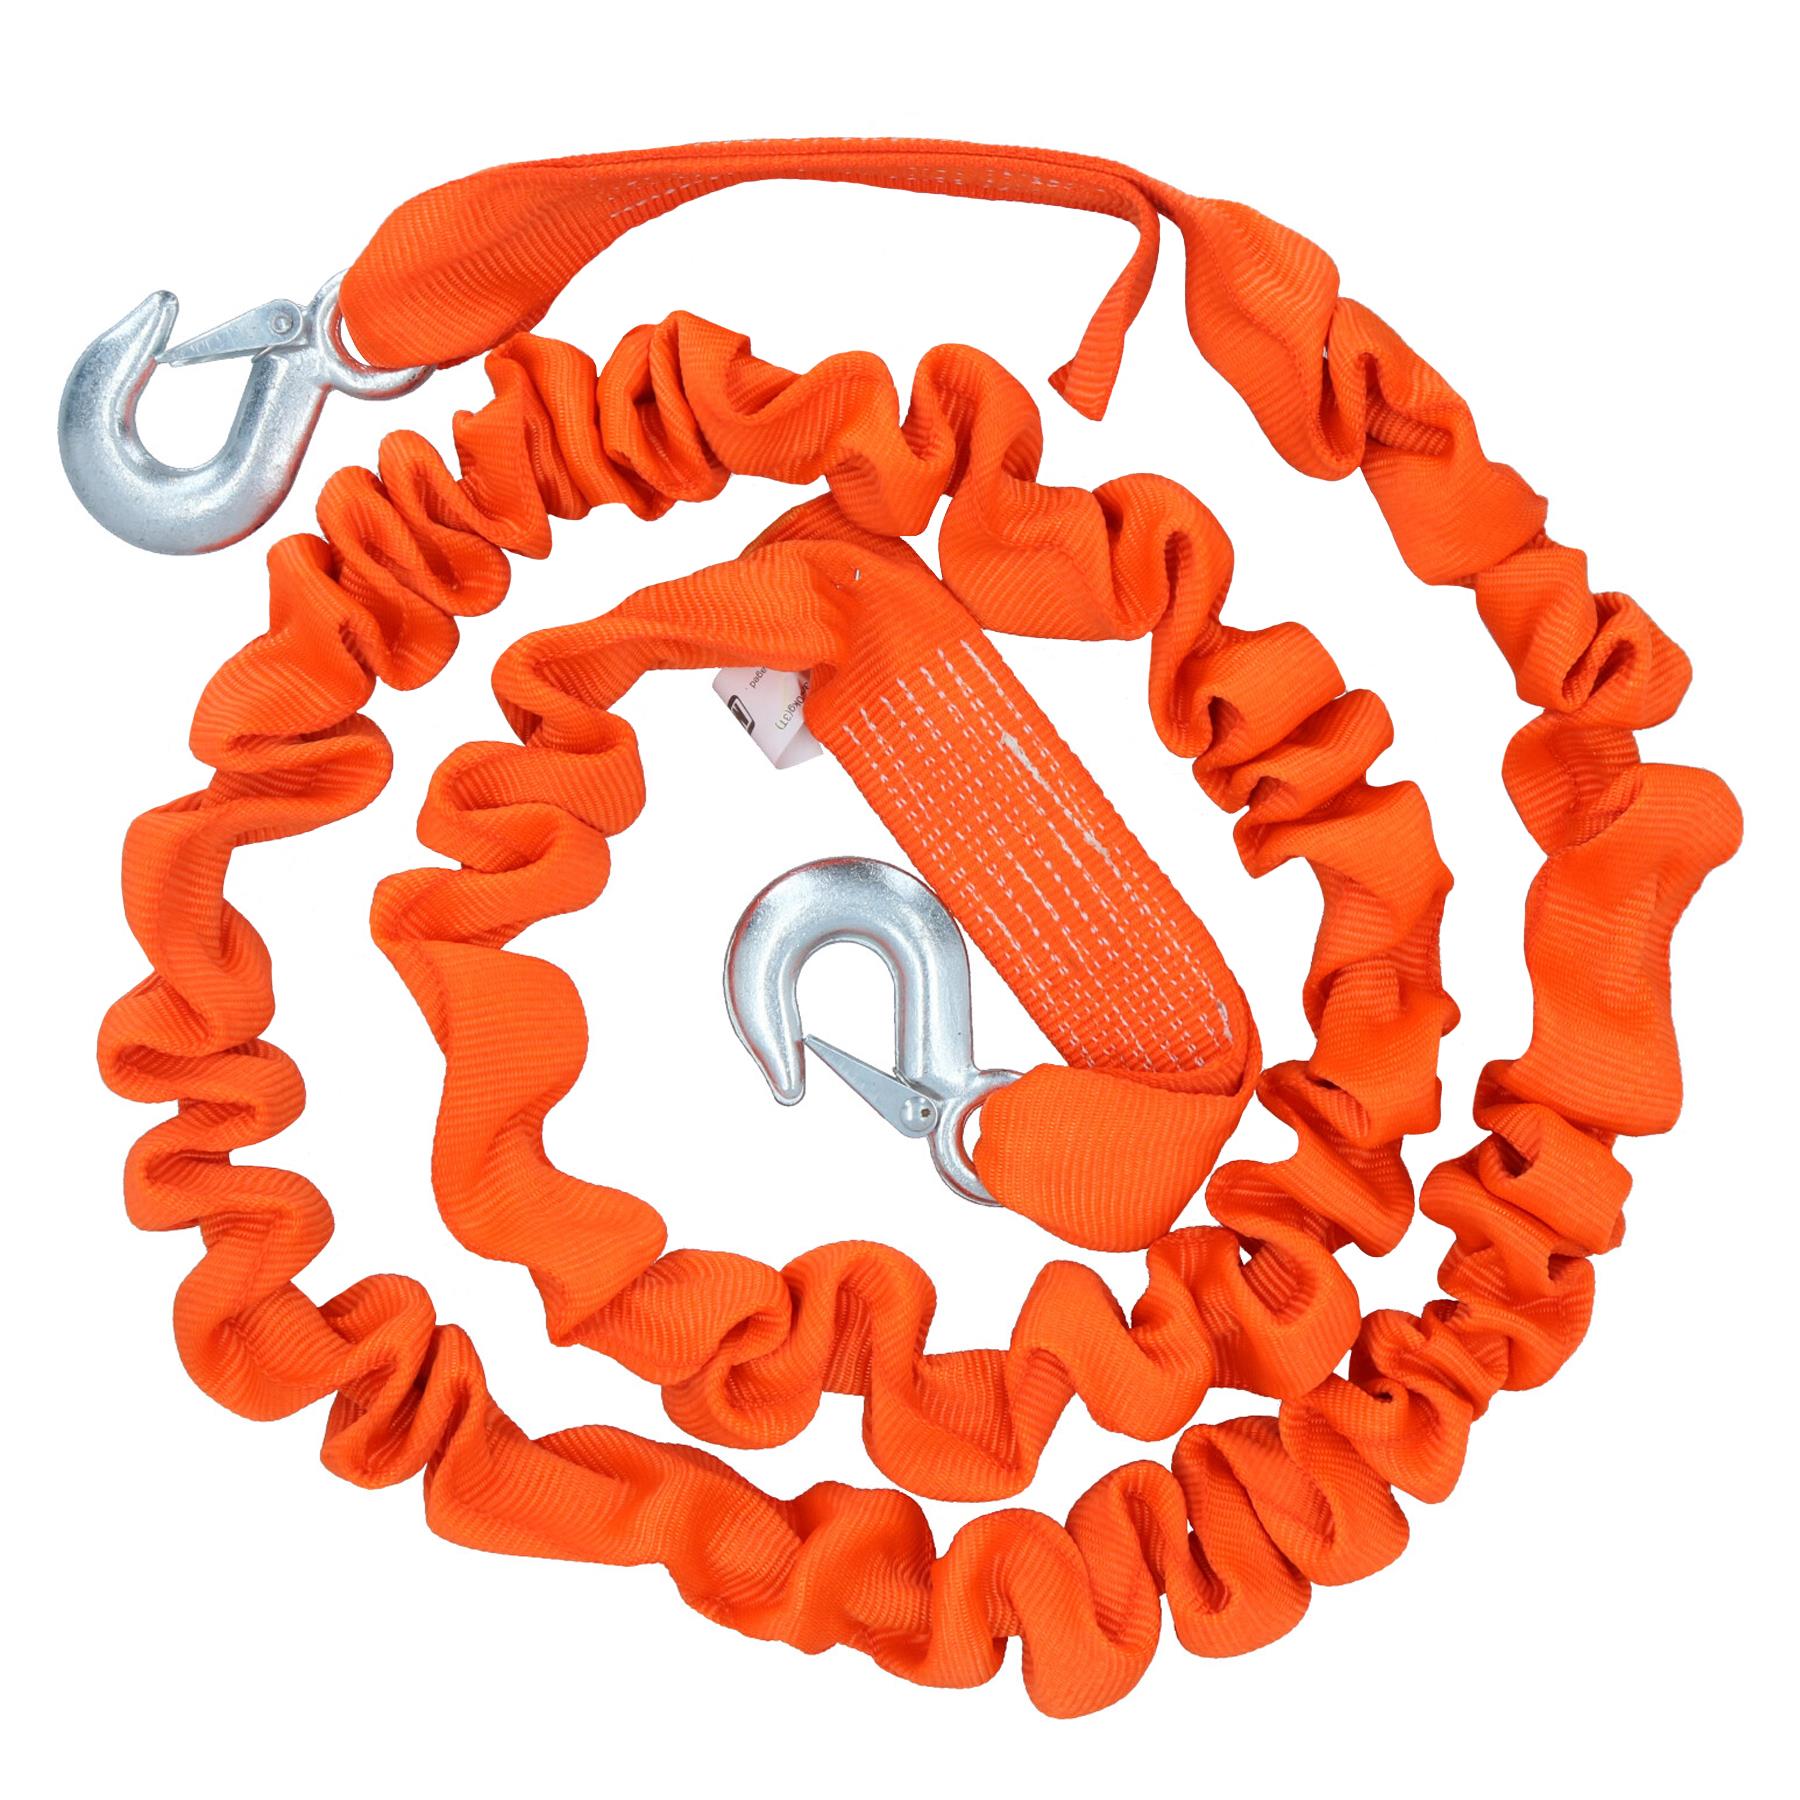 Elasticated Tow Rope with Snap Shackles & Flag 3000kg Rated Towing Strap